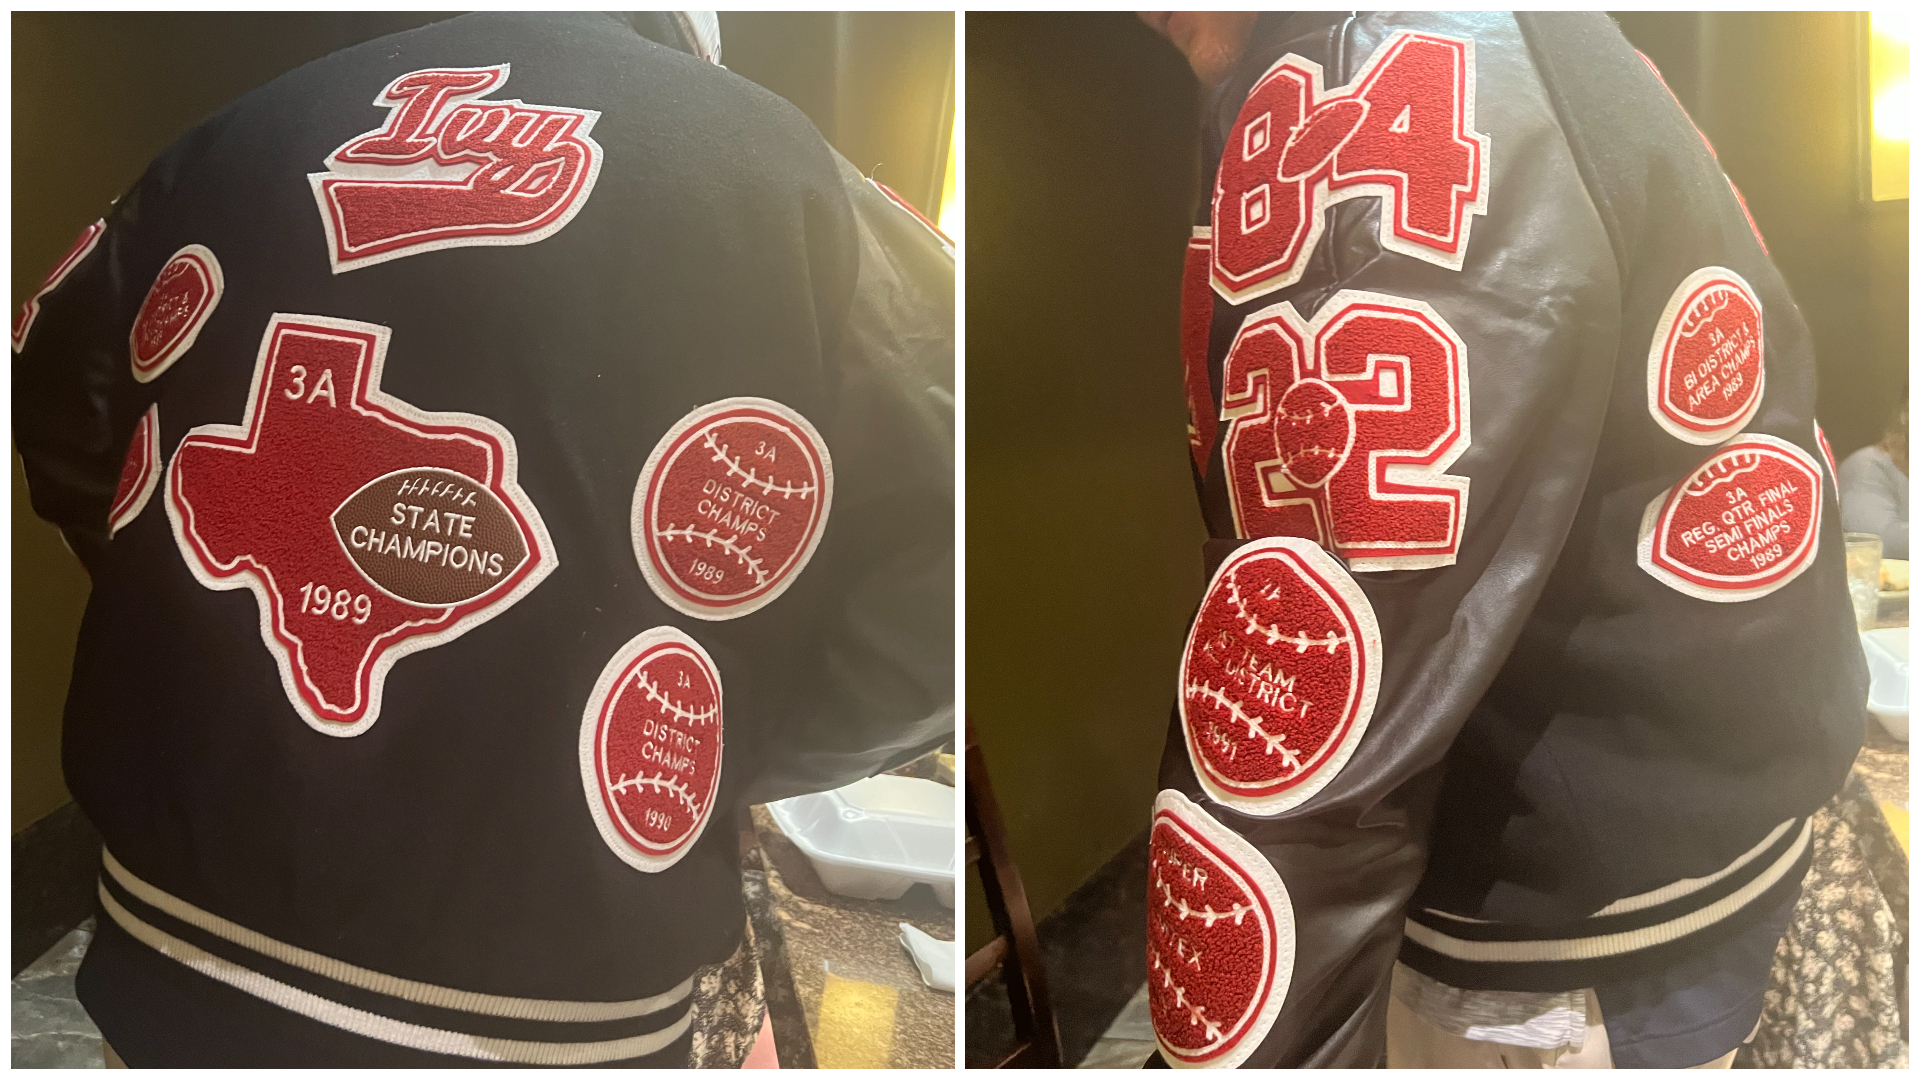 Decorated high school athlete was unable to afford letterman